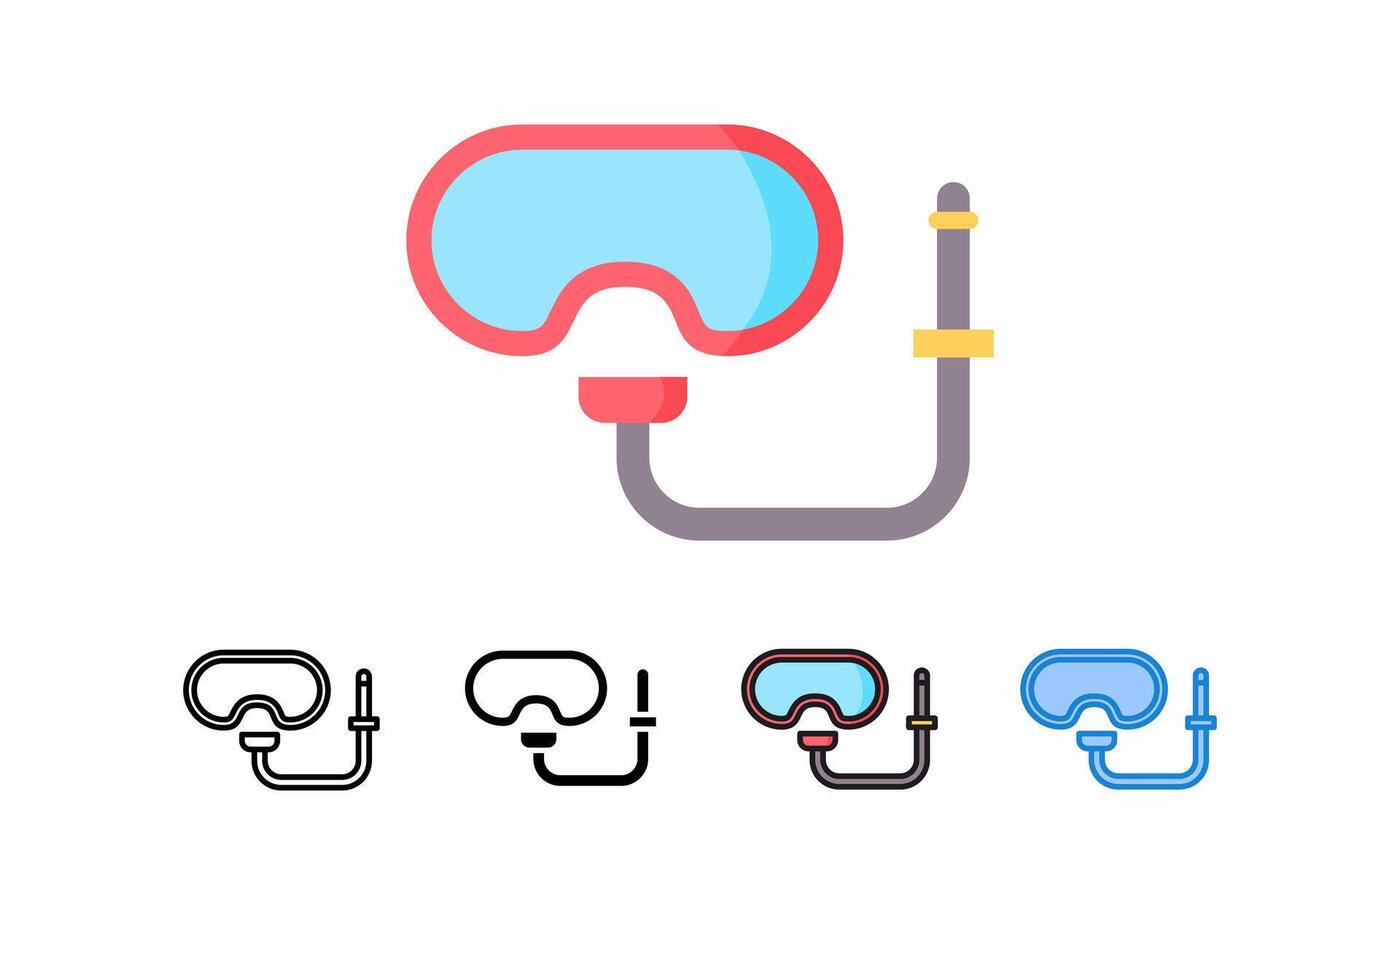 mask icon with snorkeling, diving sport, icon with 5 different styles. Perfect for web design, etc. vector